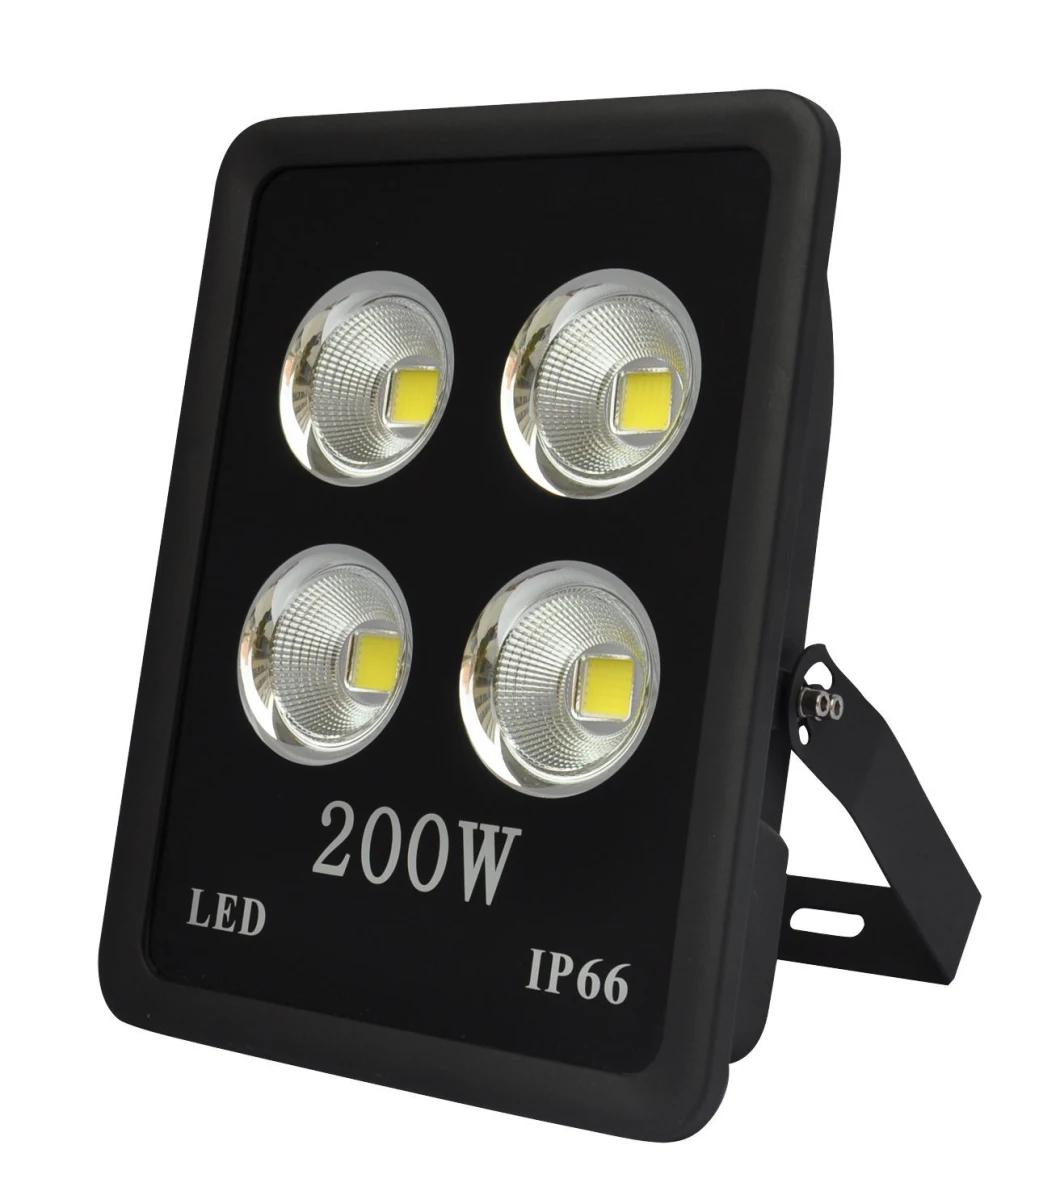 Yaye 2022 Hottest Sell New Design 50W/100W/200W/300W/400W Outdoor LED Flood Tunnel Light with 1000PCS Stock Each Watt/ 2-3 Years Warranty/CE/RoHS Approved